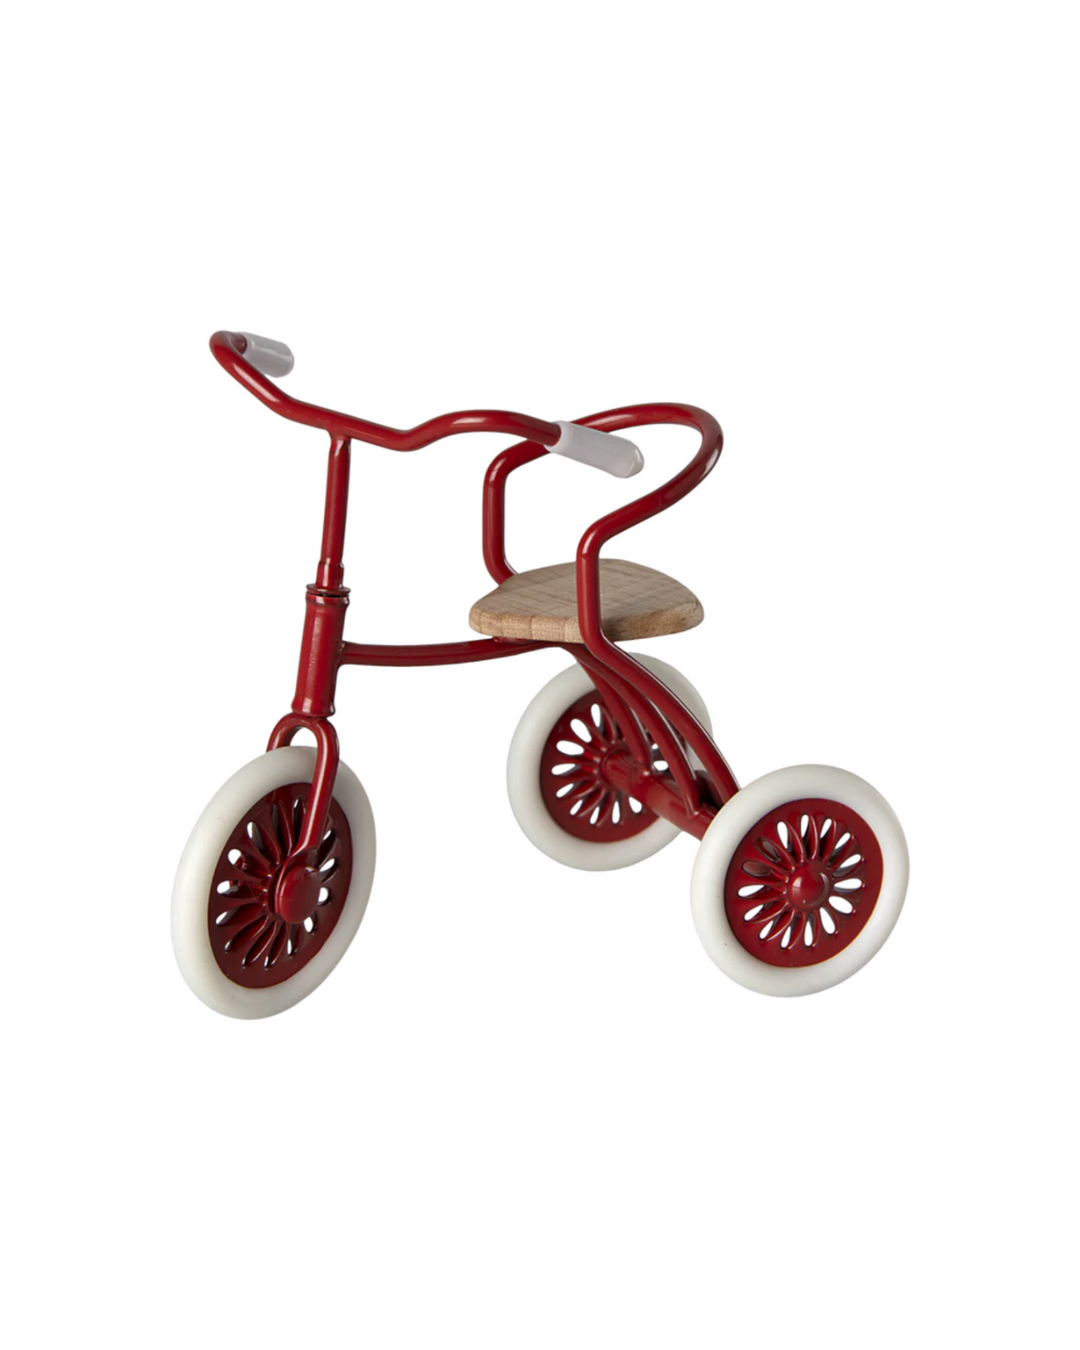 Maileg Abri a Mouse Tricycle - Red Dollhouse Toy for Kids' Play